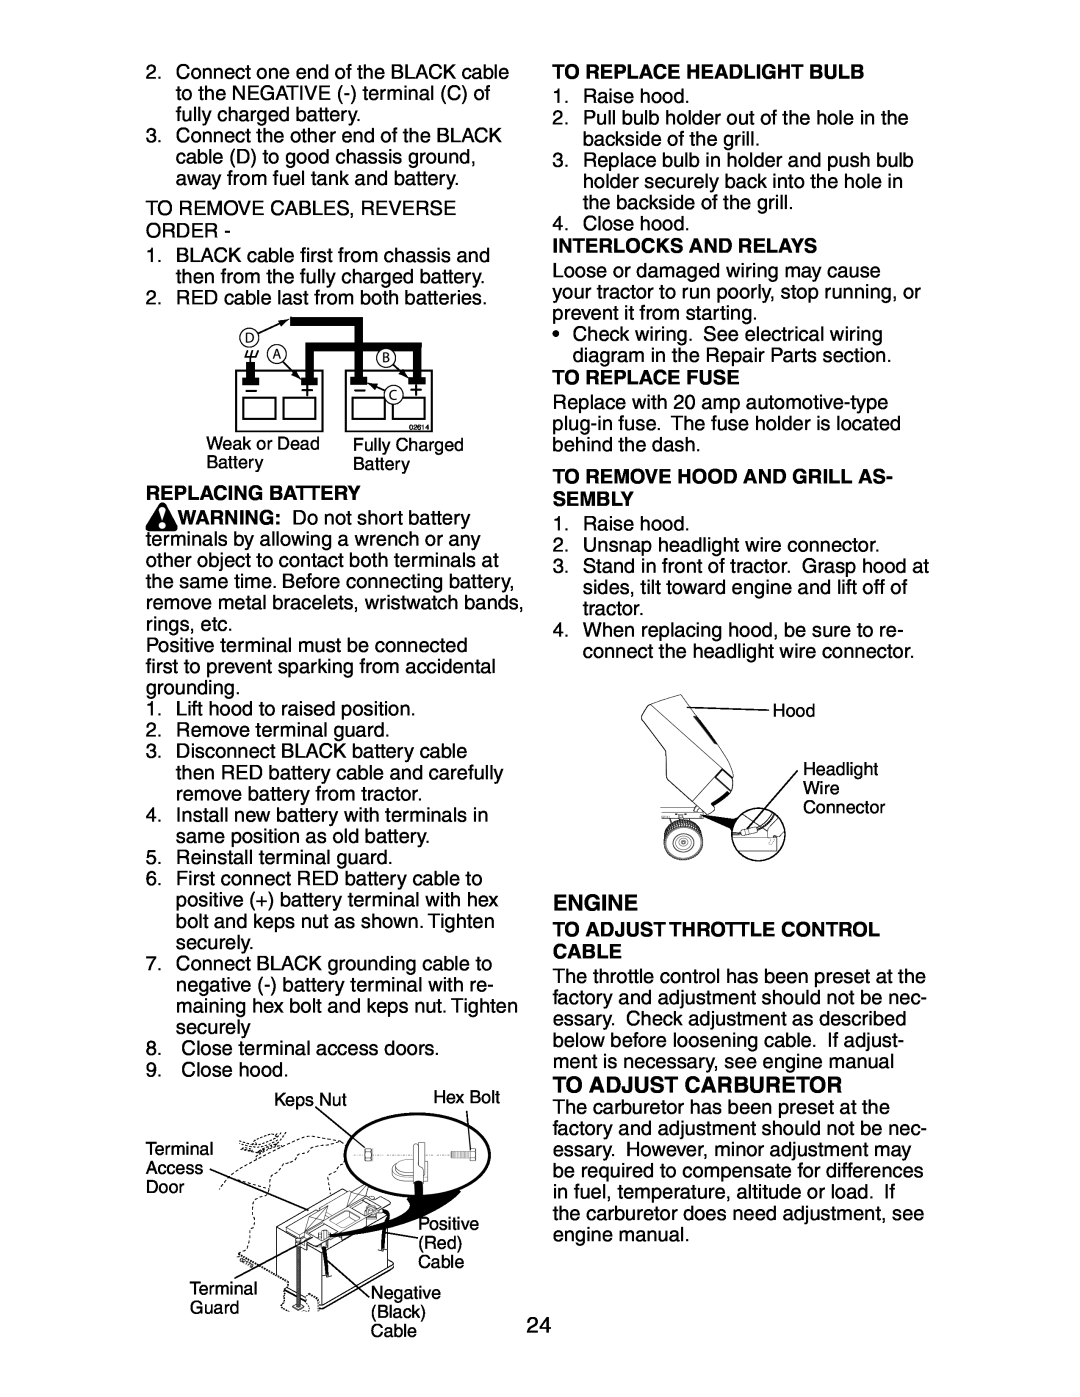 Poulan CO1842STA manual To Adjust Carburetor, To Replace Headlight Bulb, Interlocks And Relays, Replacing Battery, Engine 